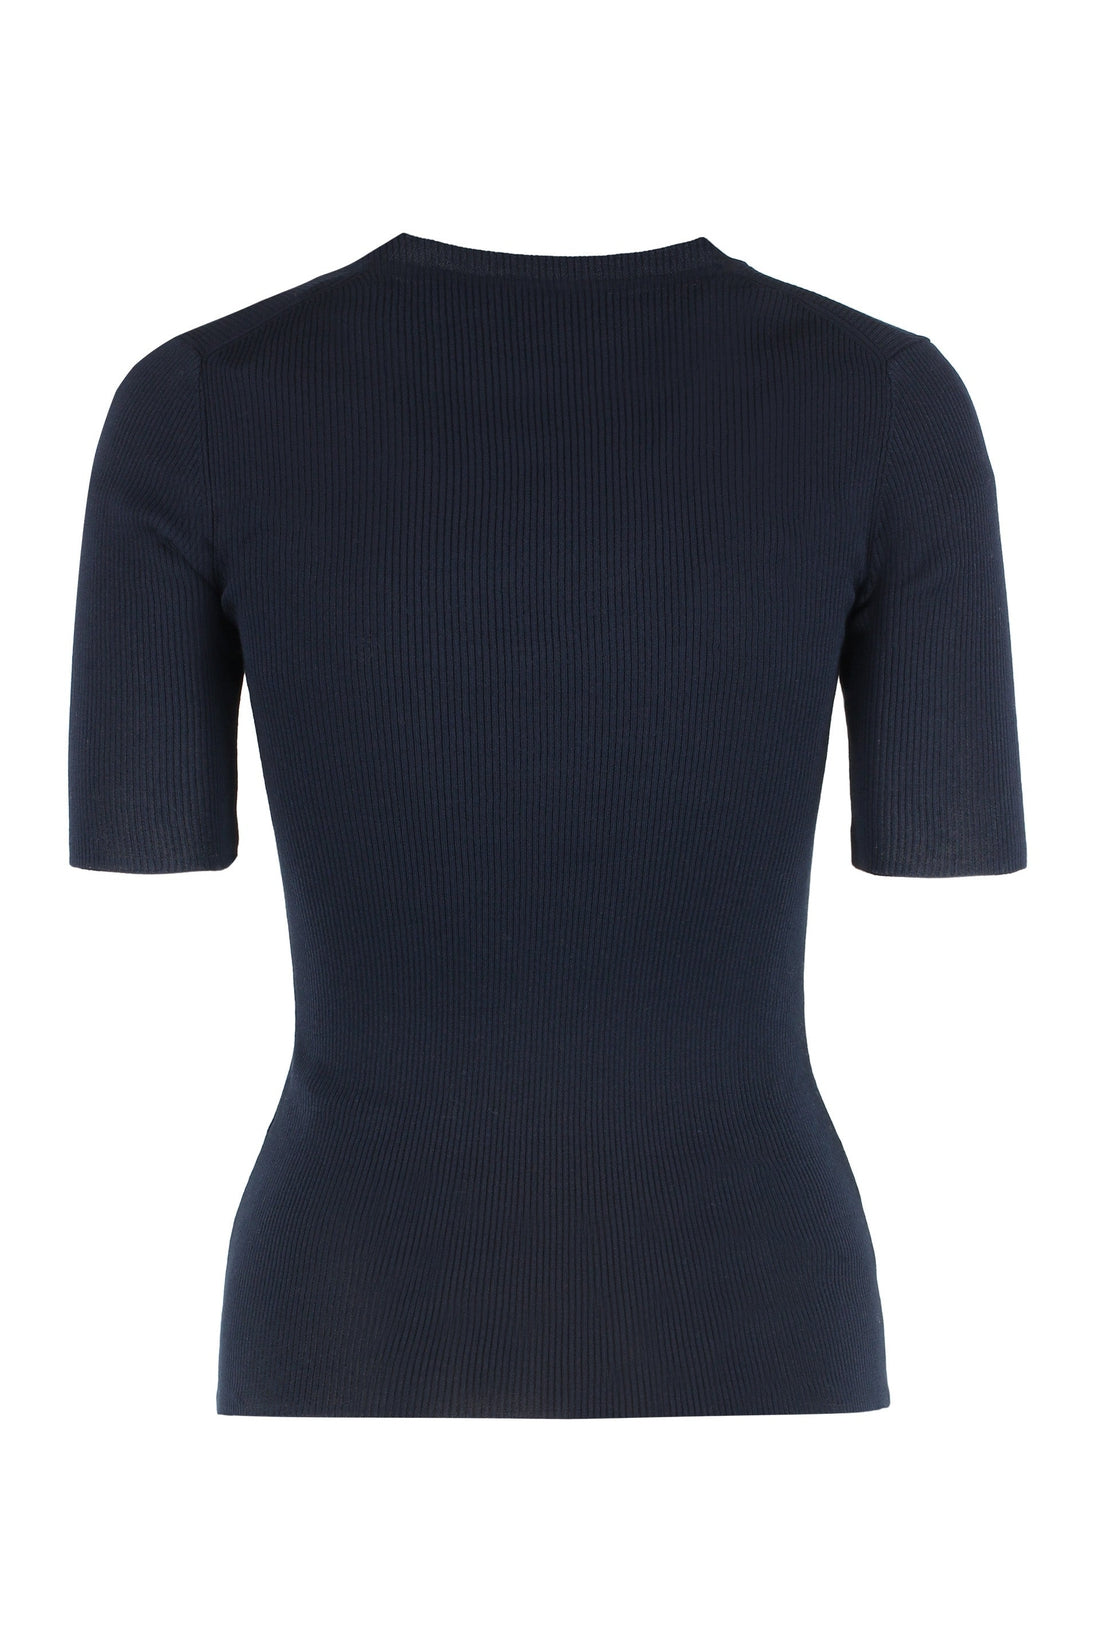 Parosh-OUTLET-SALE-Cipria knitted top-ARCHIVIST